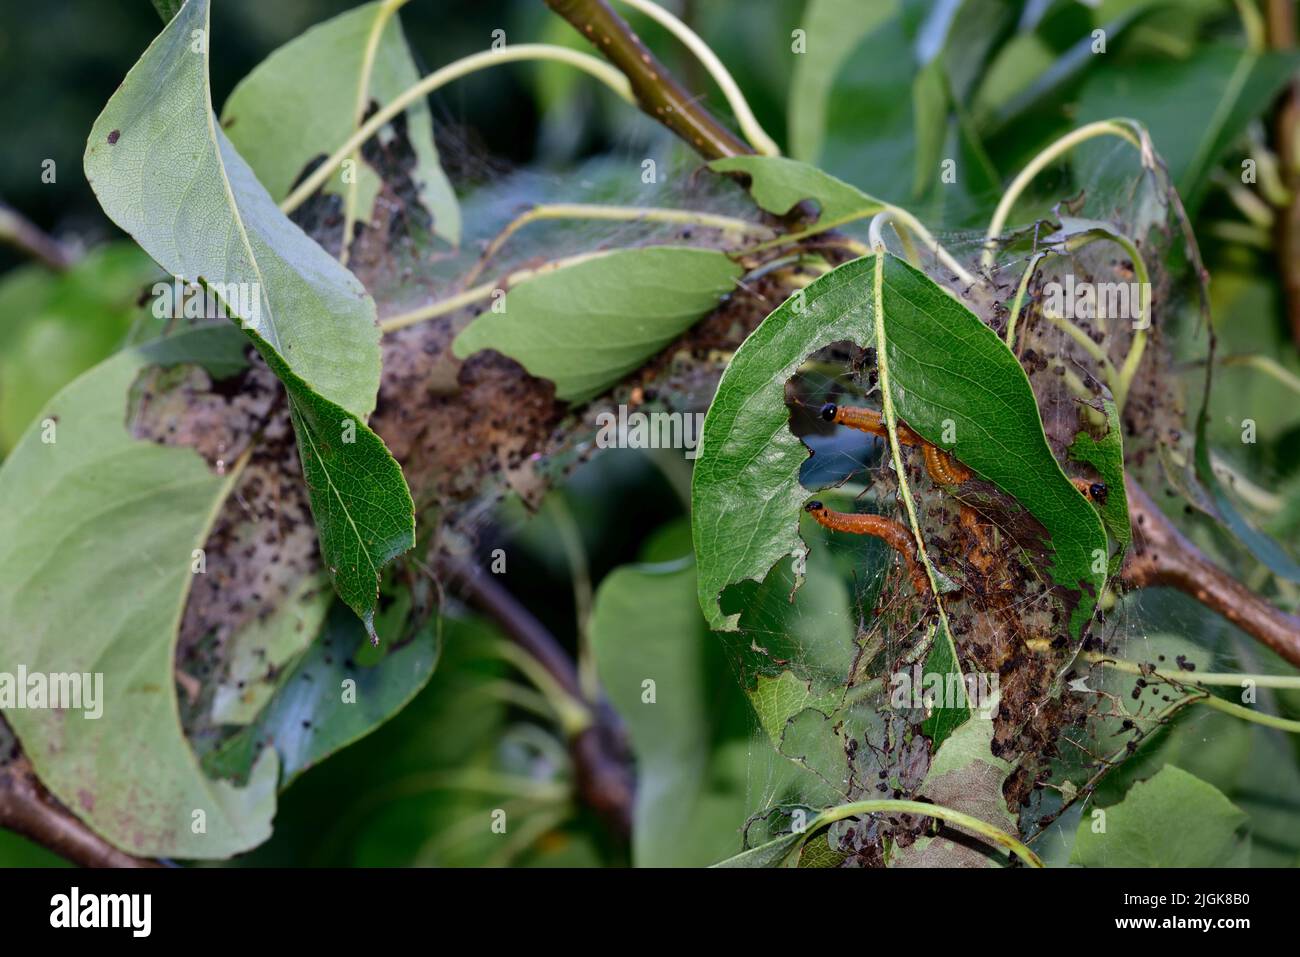 Social Pear sawfly caterpillars (larvae), Neurotoma saltuum, with orange bodies black heads feeding on leaf of pear tree with some of their web visibl Stock Photo